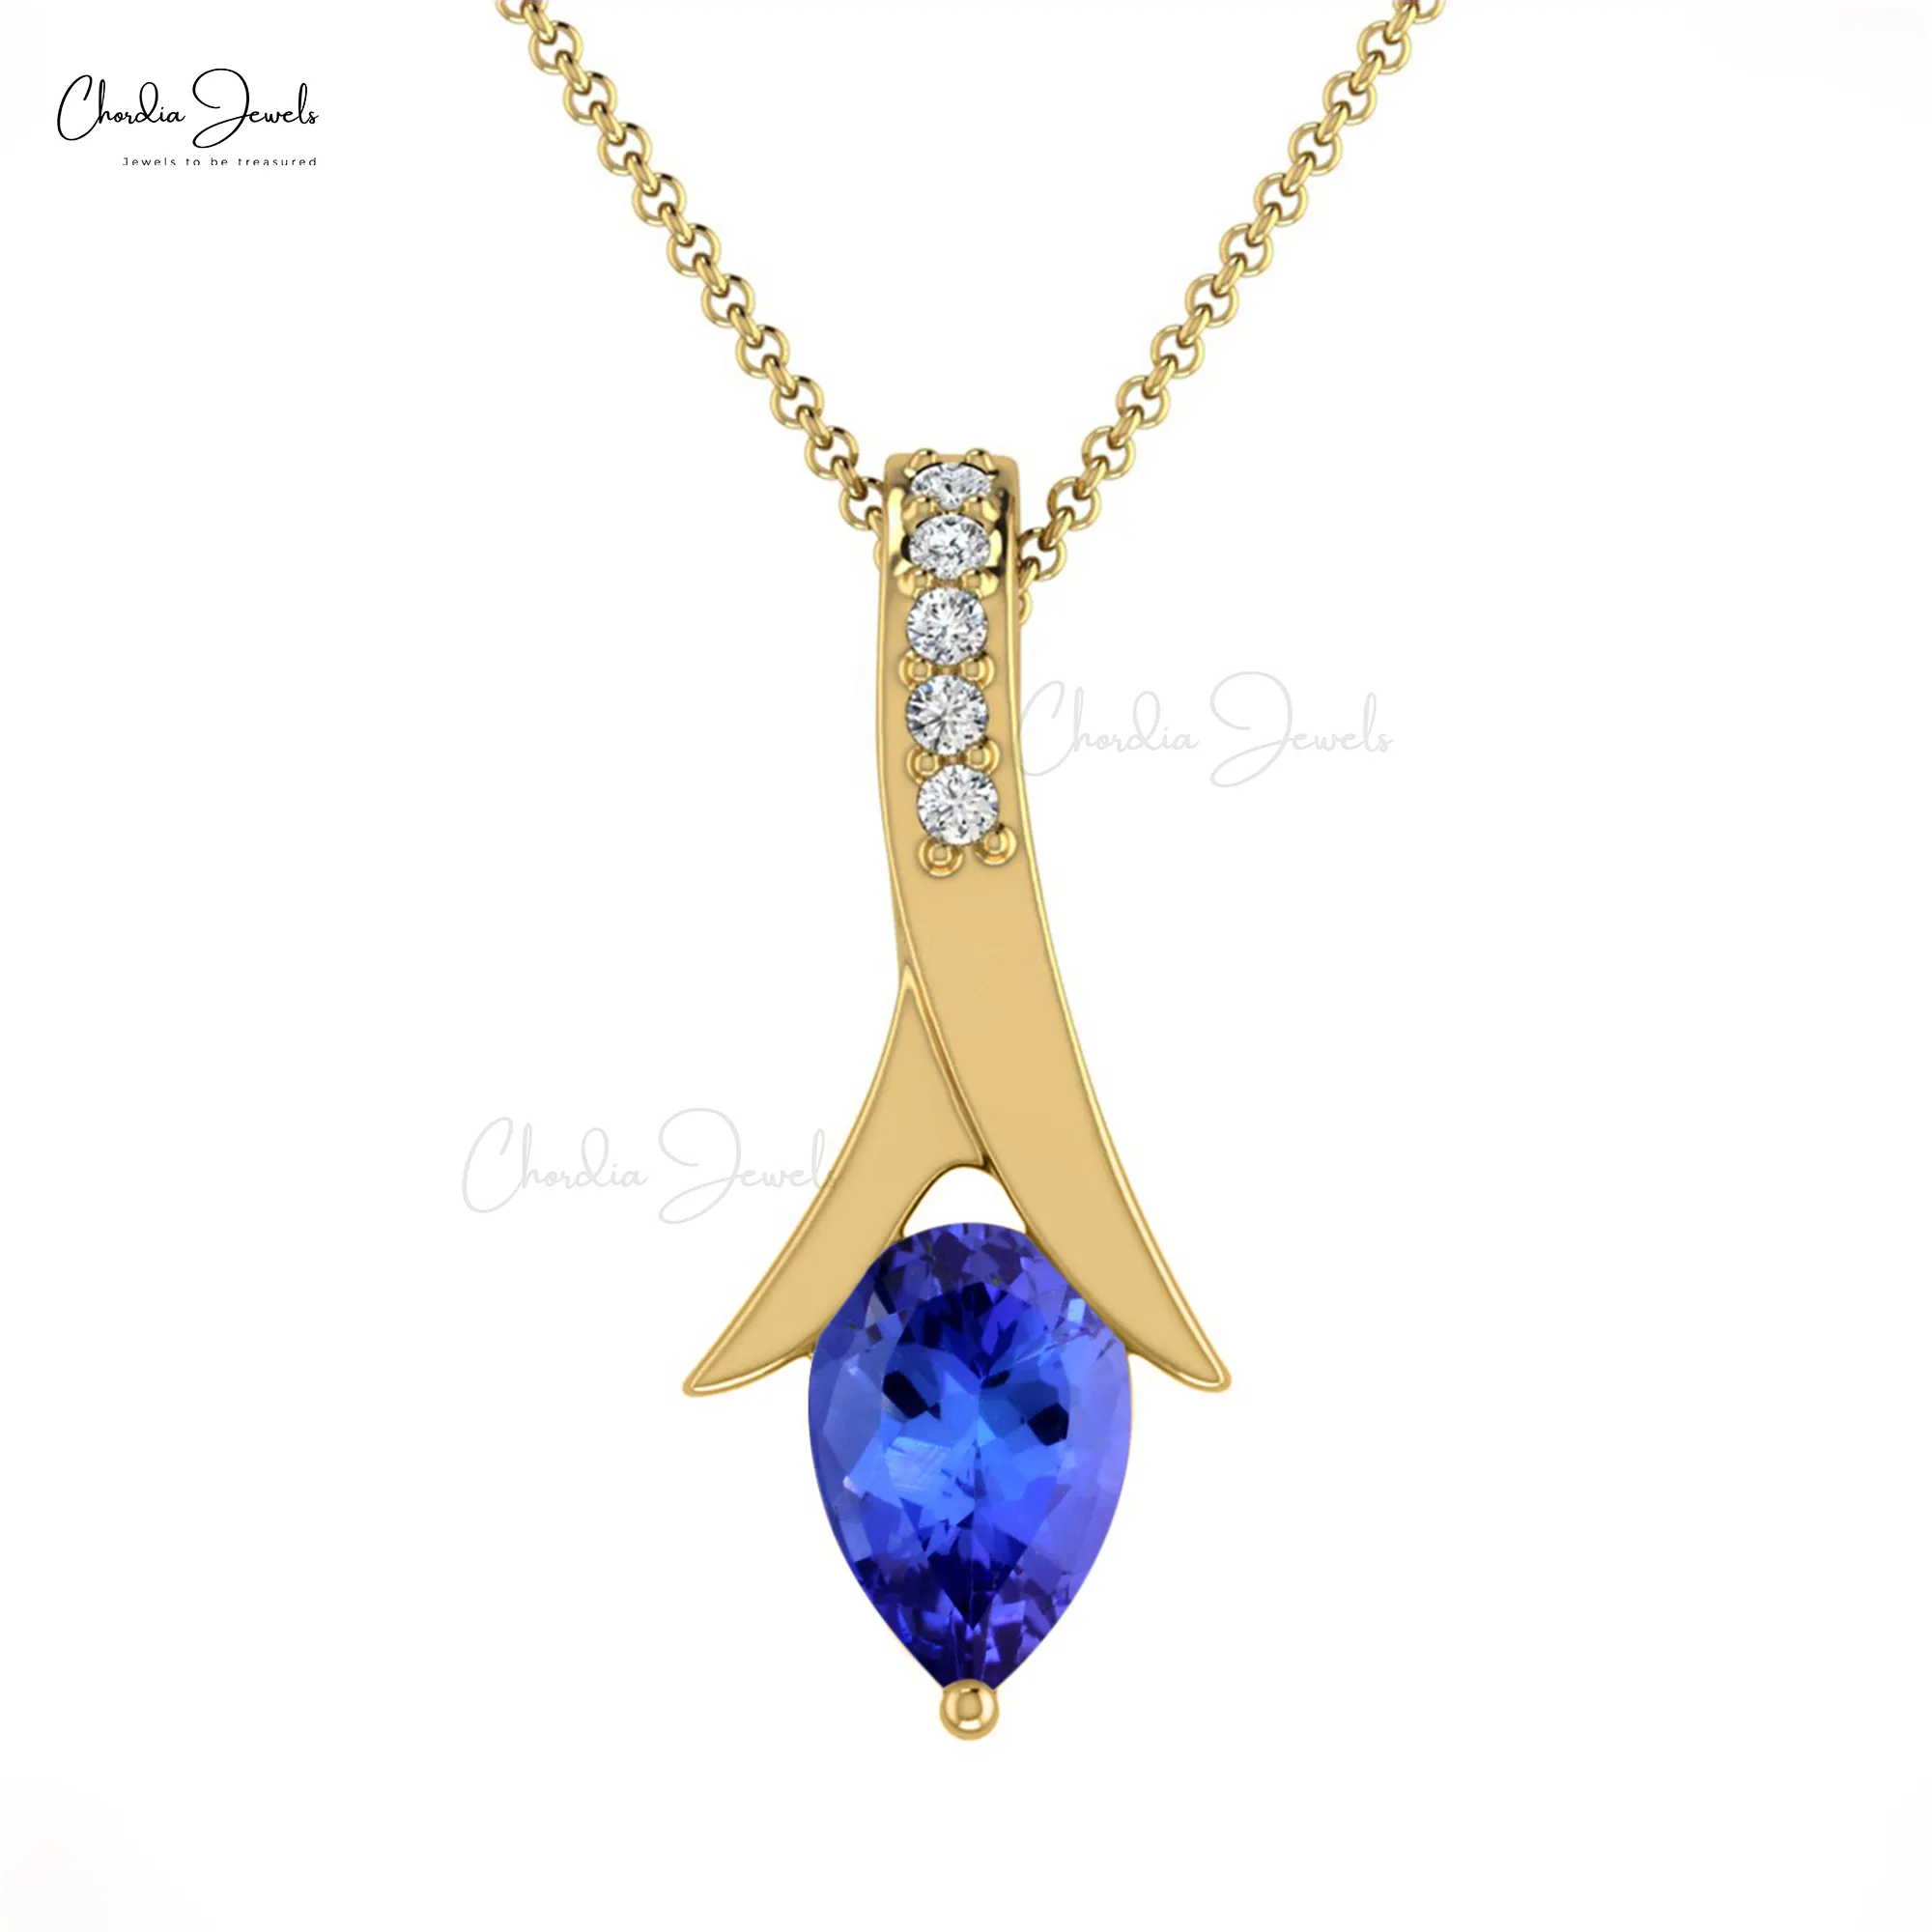 Trendy Tanzanite Tear Drop Pendant 6X4mm Pear Cut Gemstone With Diamond In 14k Solid Gold Prong Set Jewelry At Discounted Price